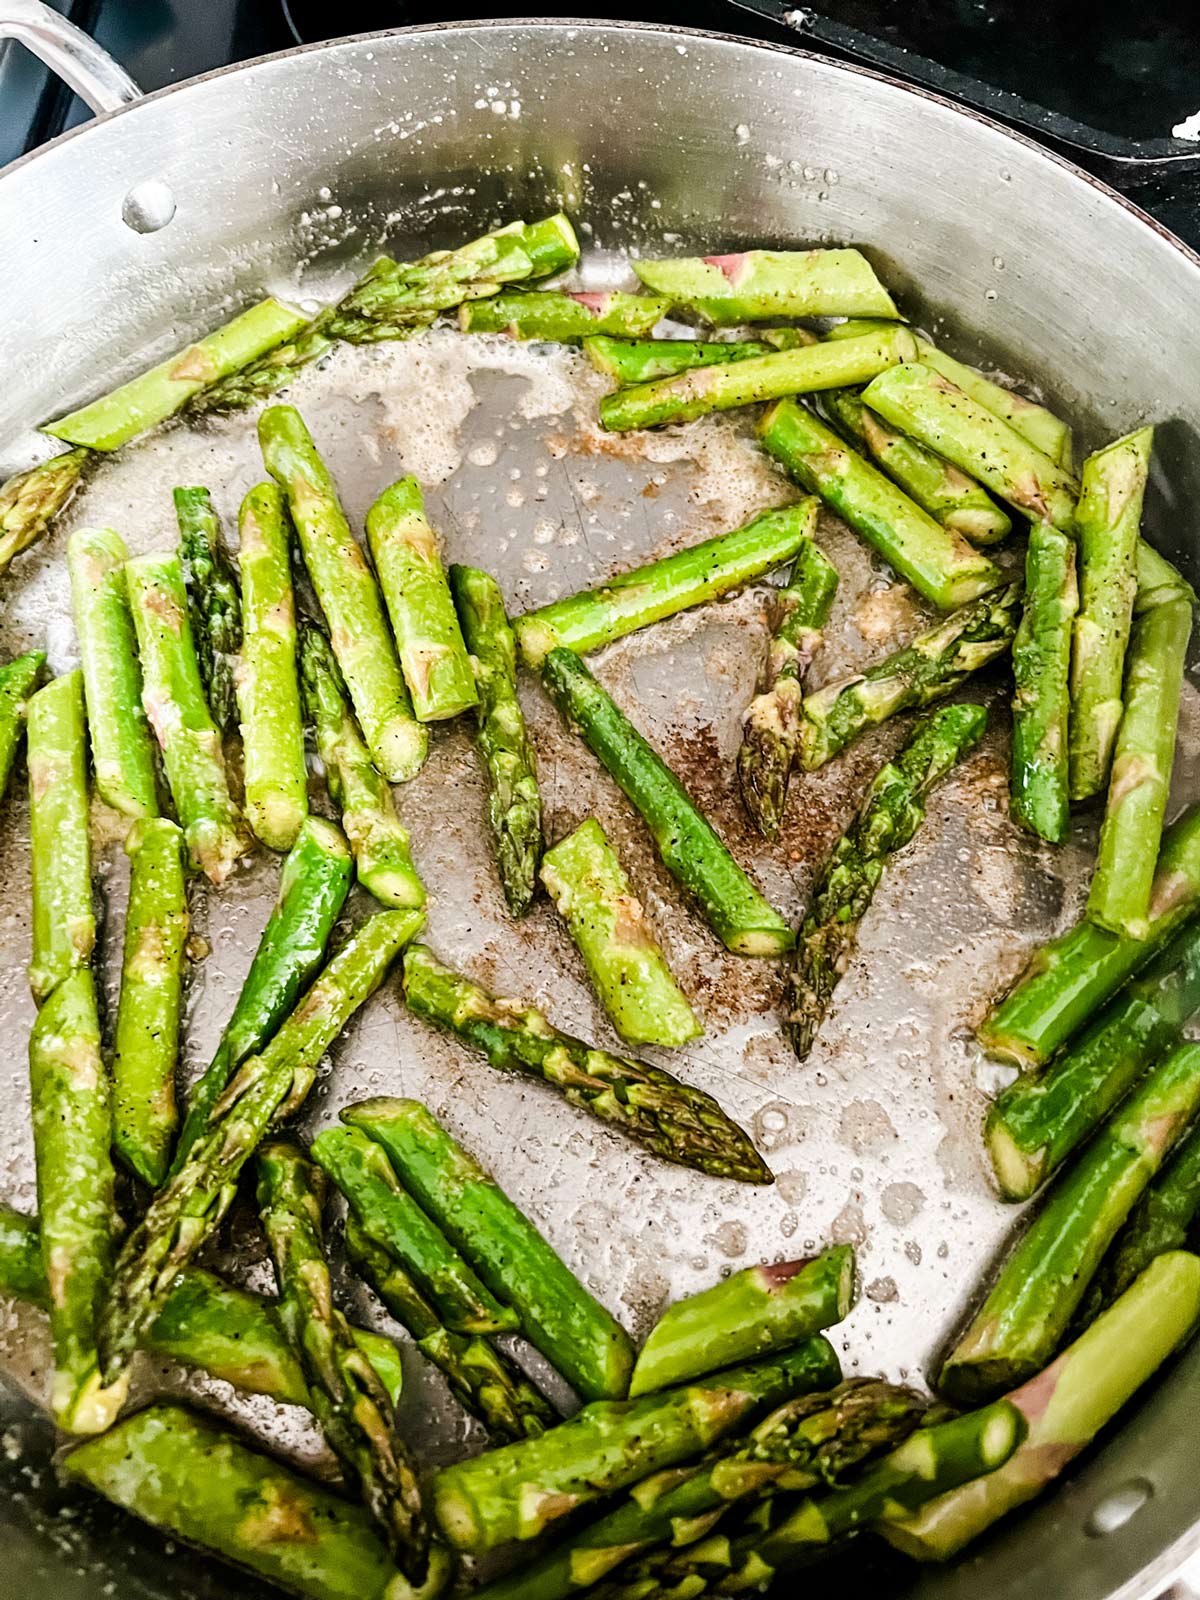 Asparagus that has cooked with garlic and butter in a skillet.